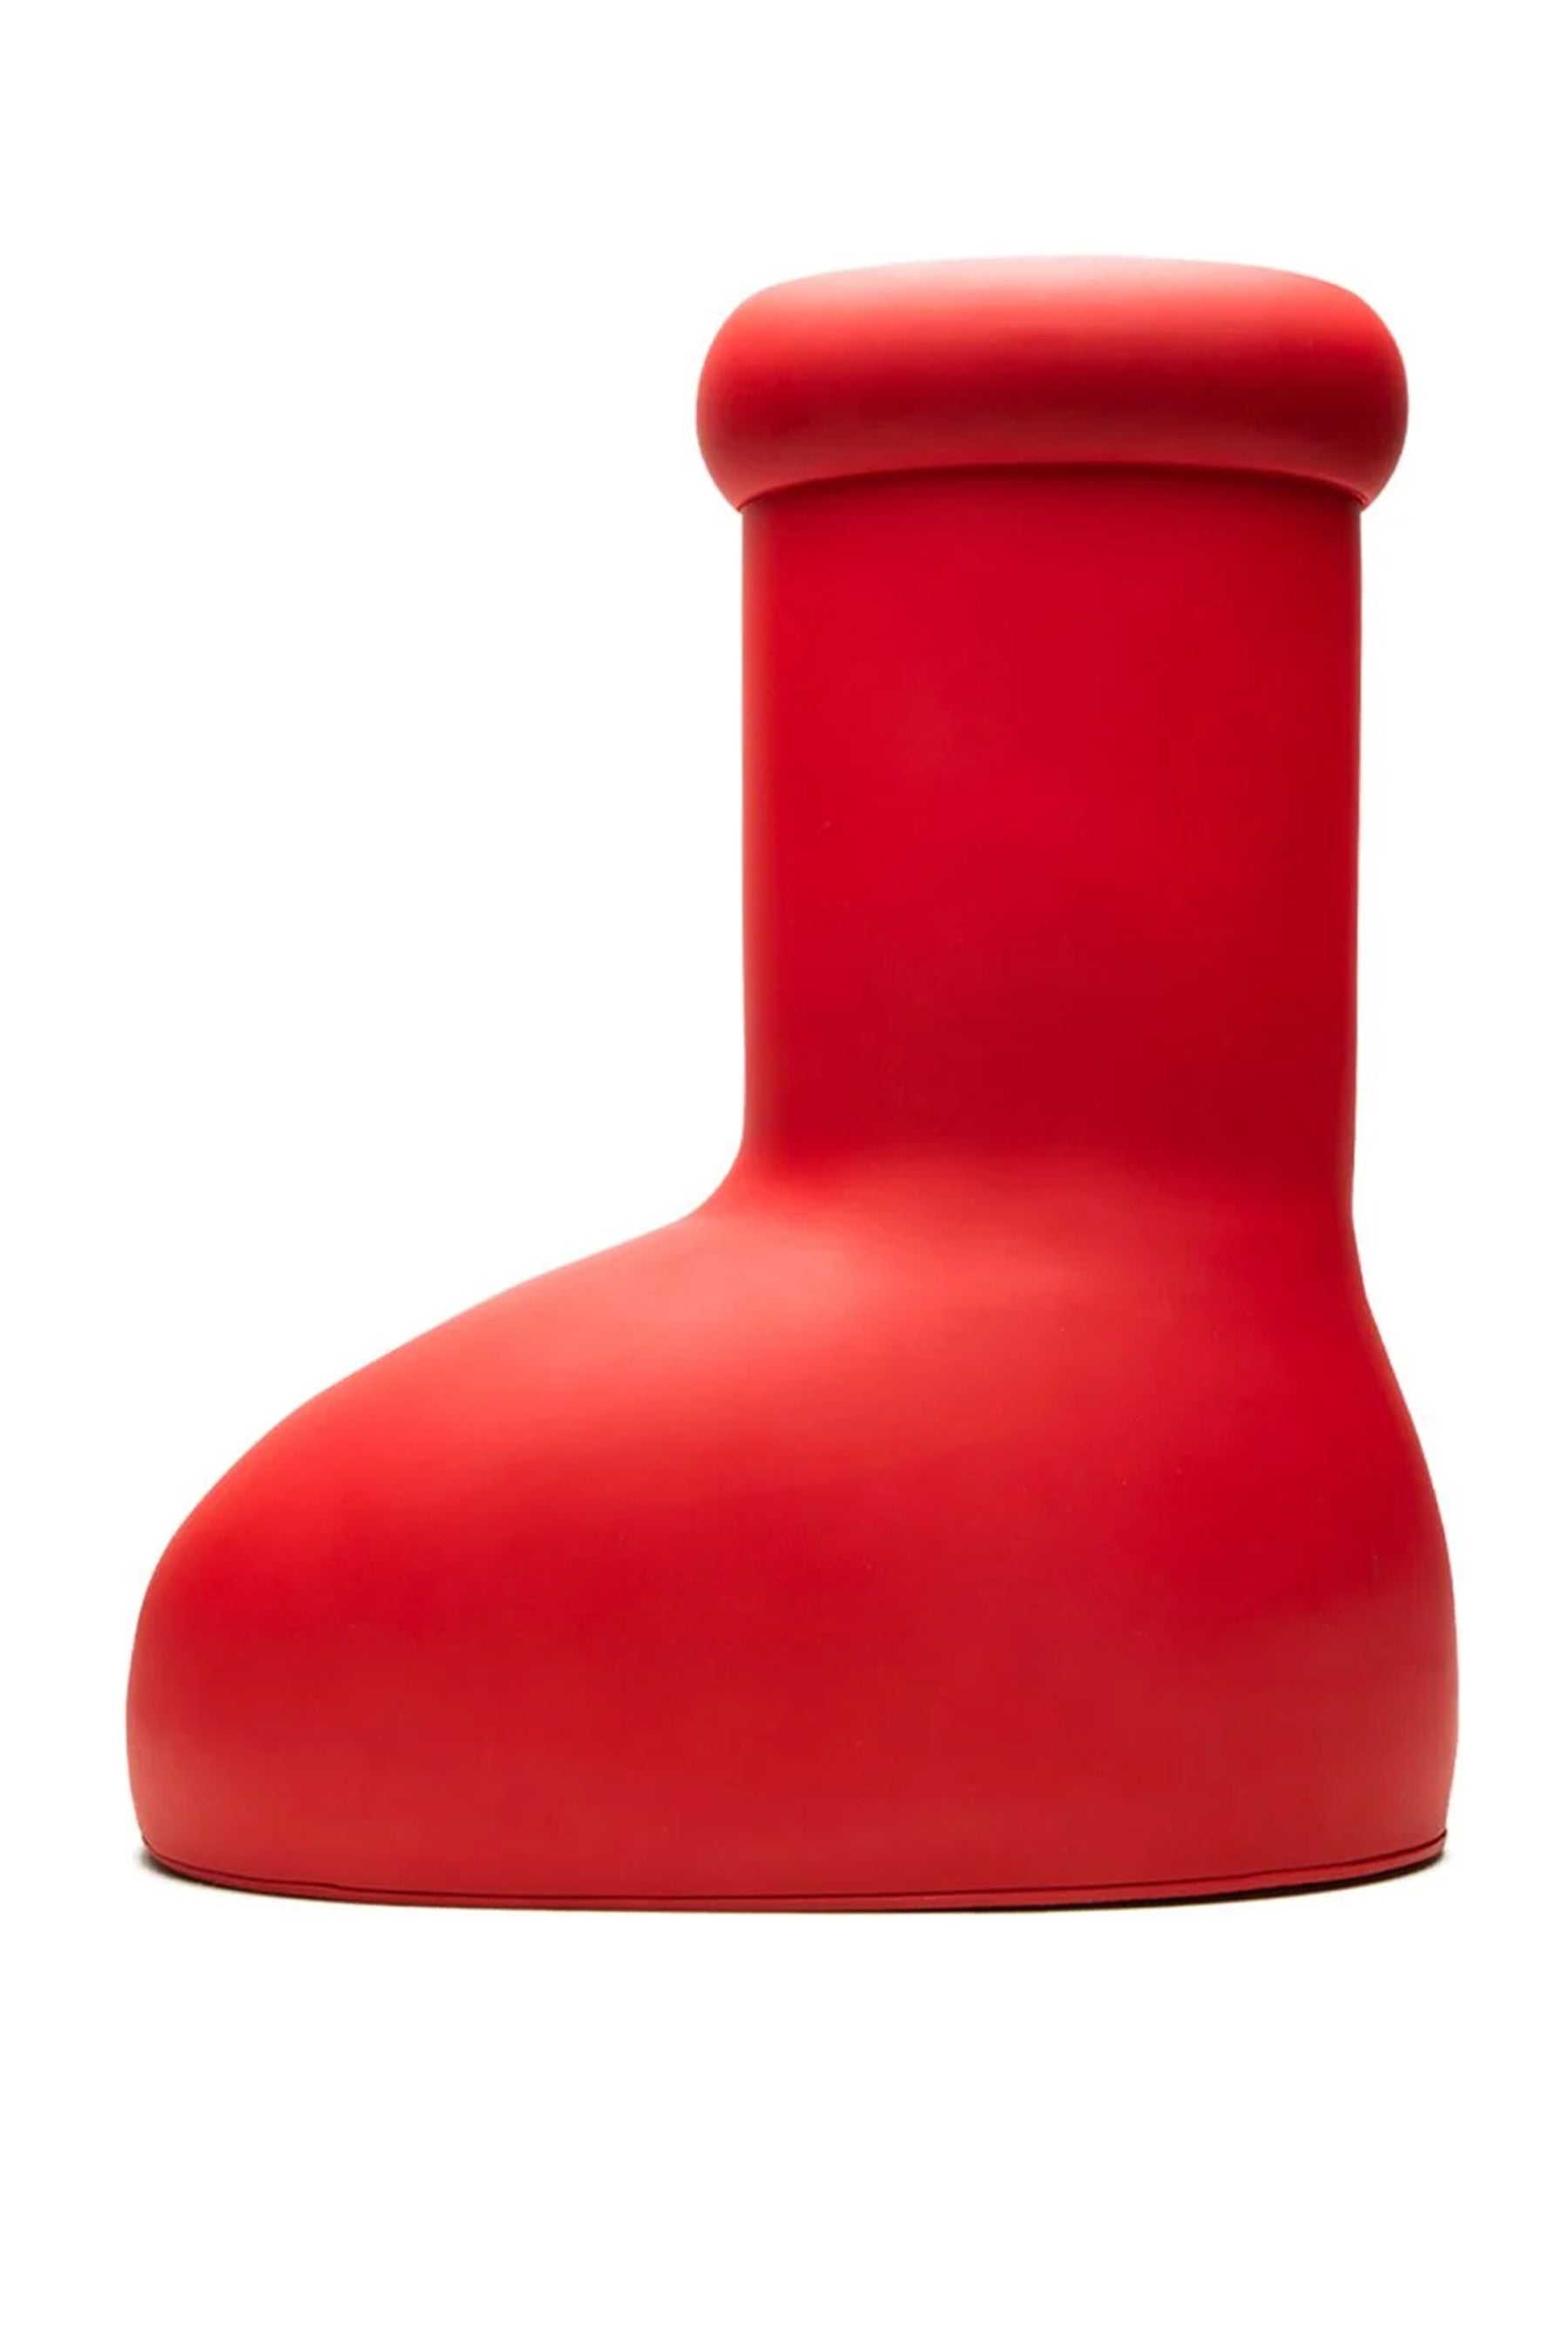 MSCHF Big Red Boot Shoes - Size 11 - Red / Red